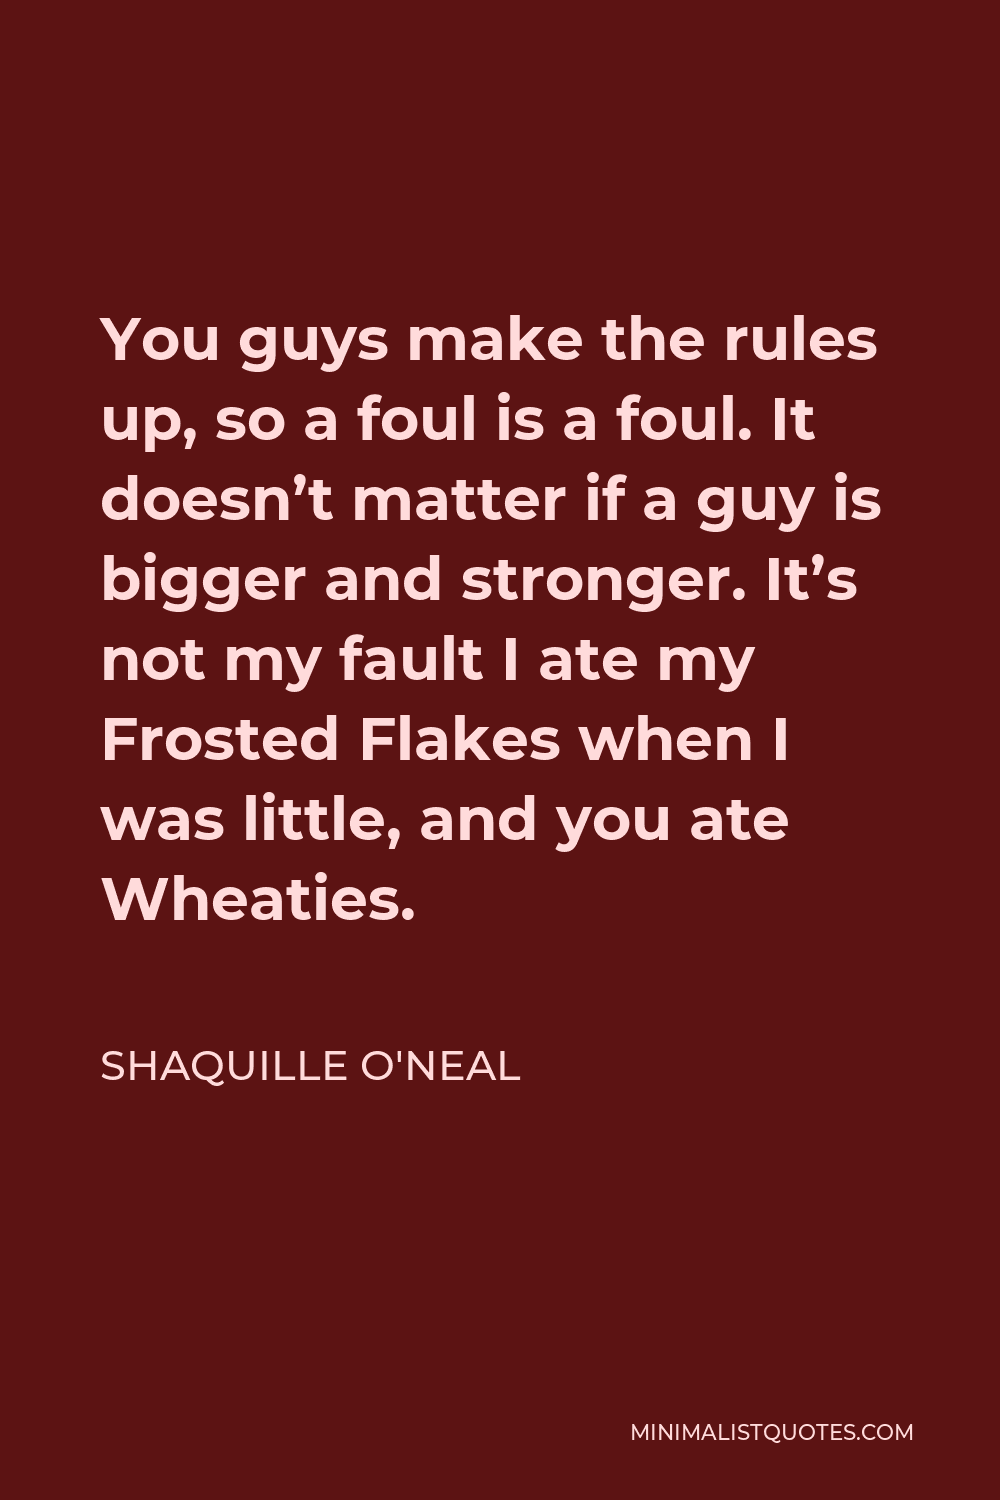 Shaquille O'Neal Quote: “A pinch is a pinch. If you pinch my right nipple,  I'm going to say, 'ouch.' If I pinch your right nipple, you're going t”